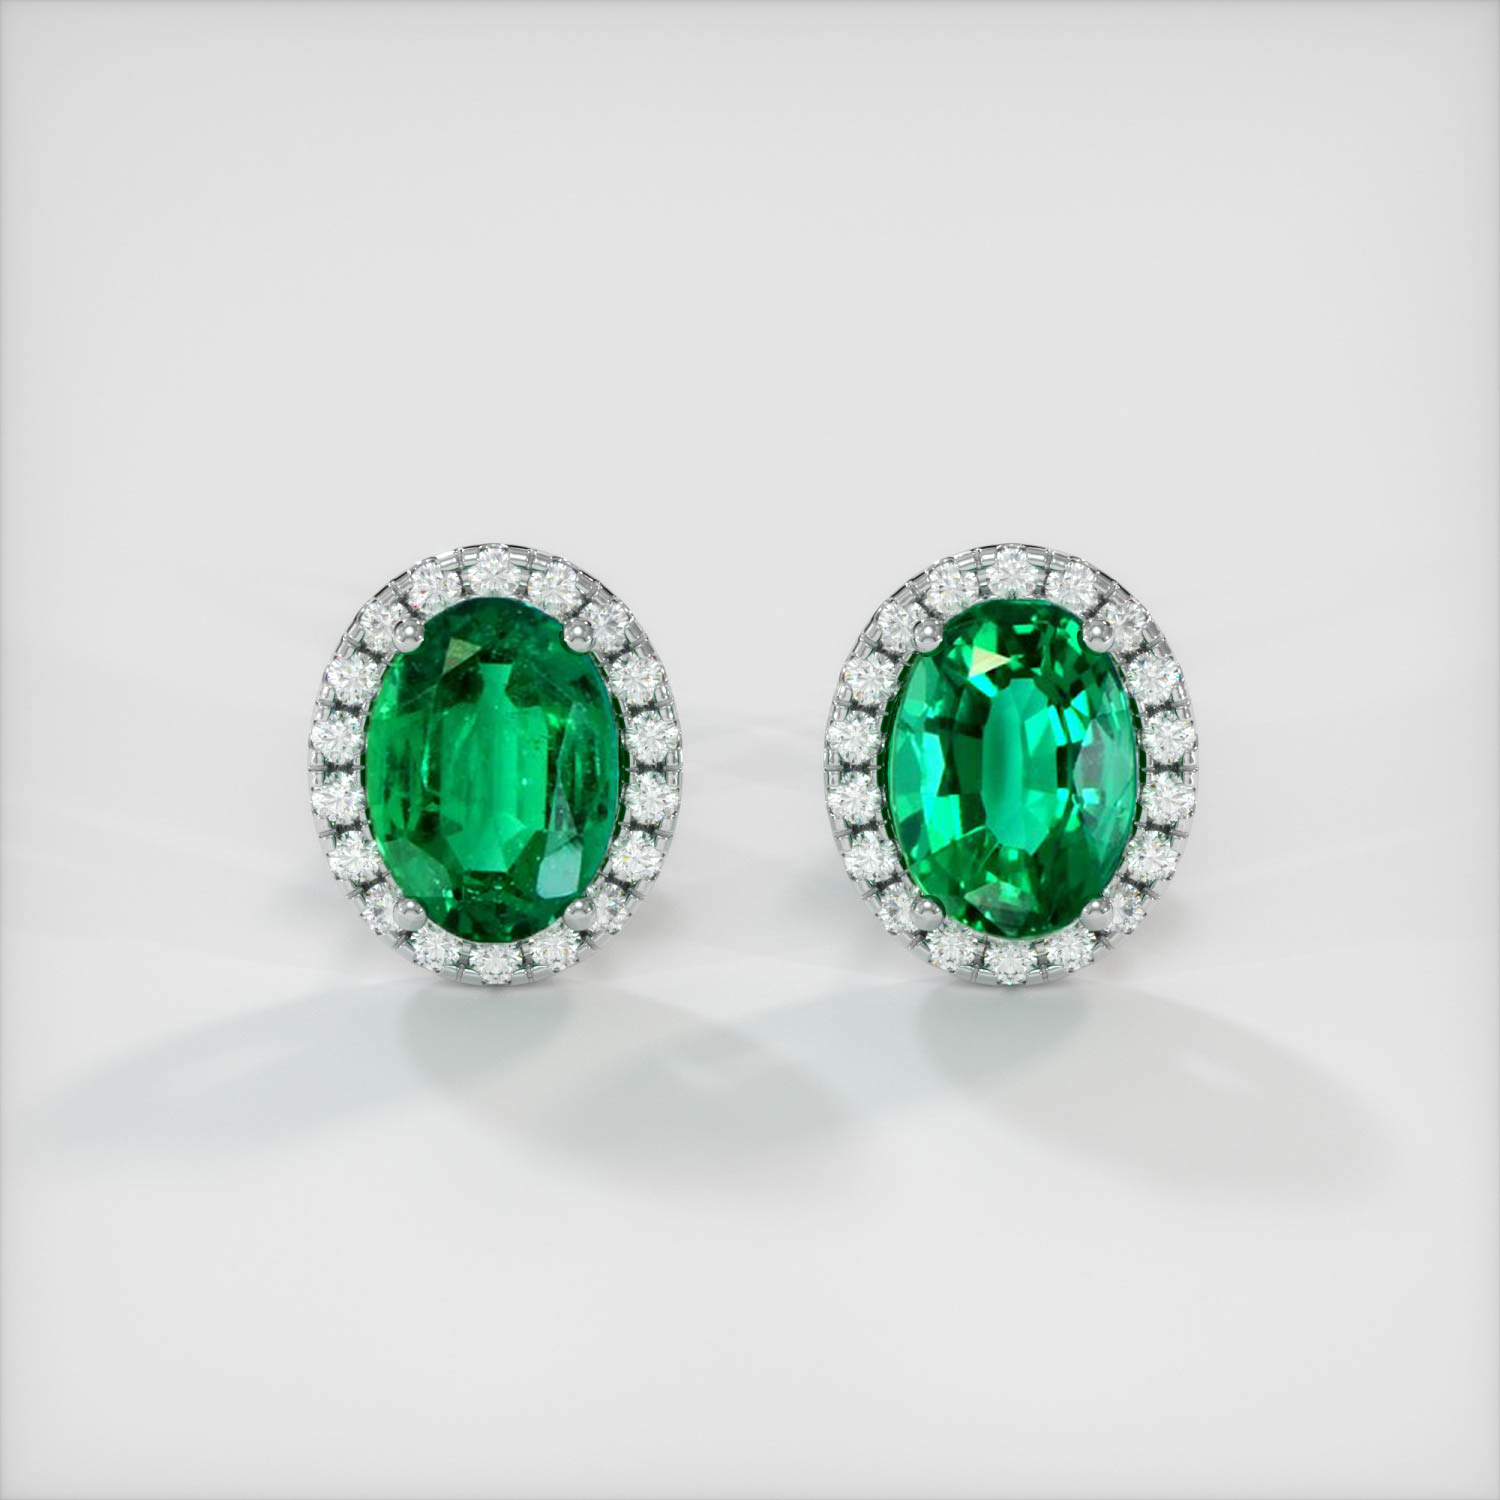 Pave Emerald Earrings 1.43 Ct.Tw.Total Carat Weight, Platinum 950